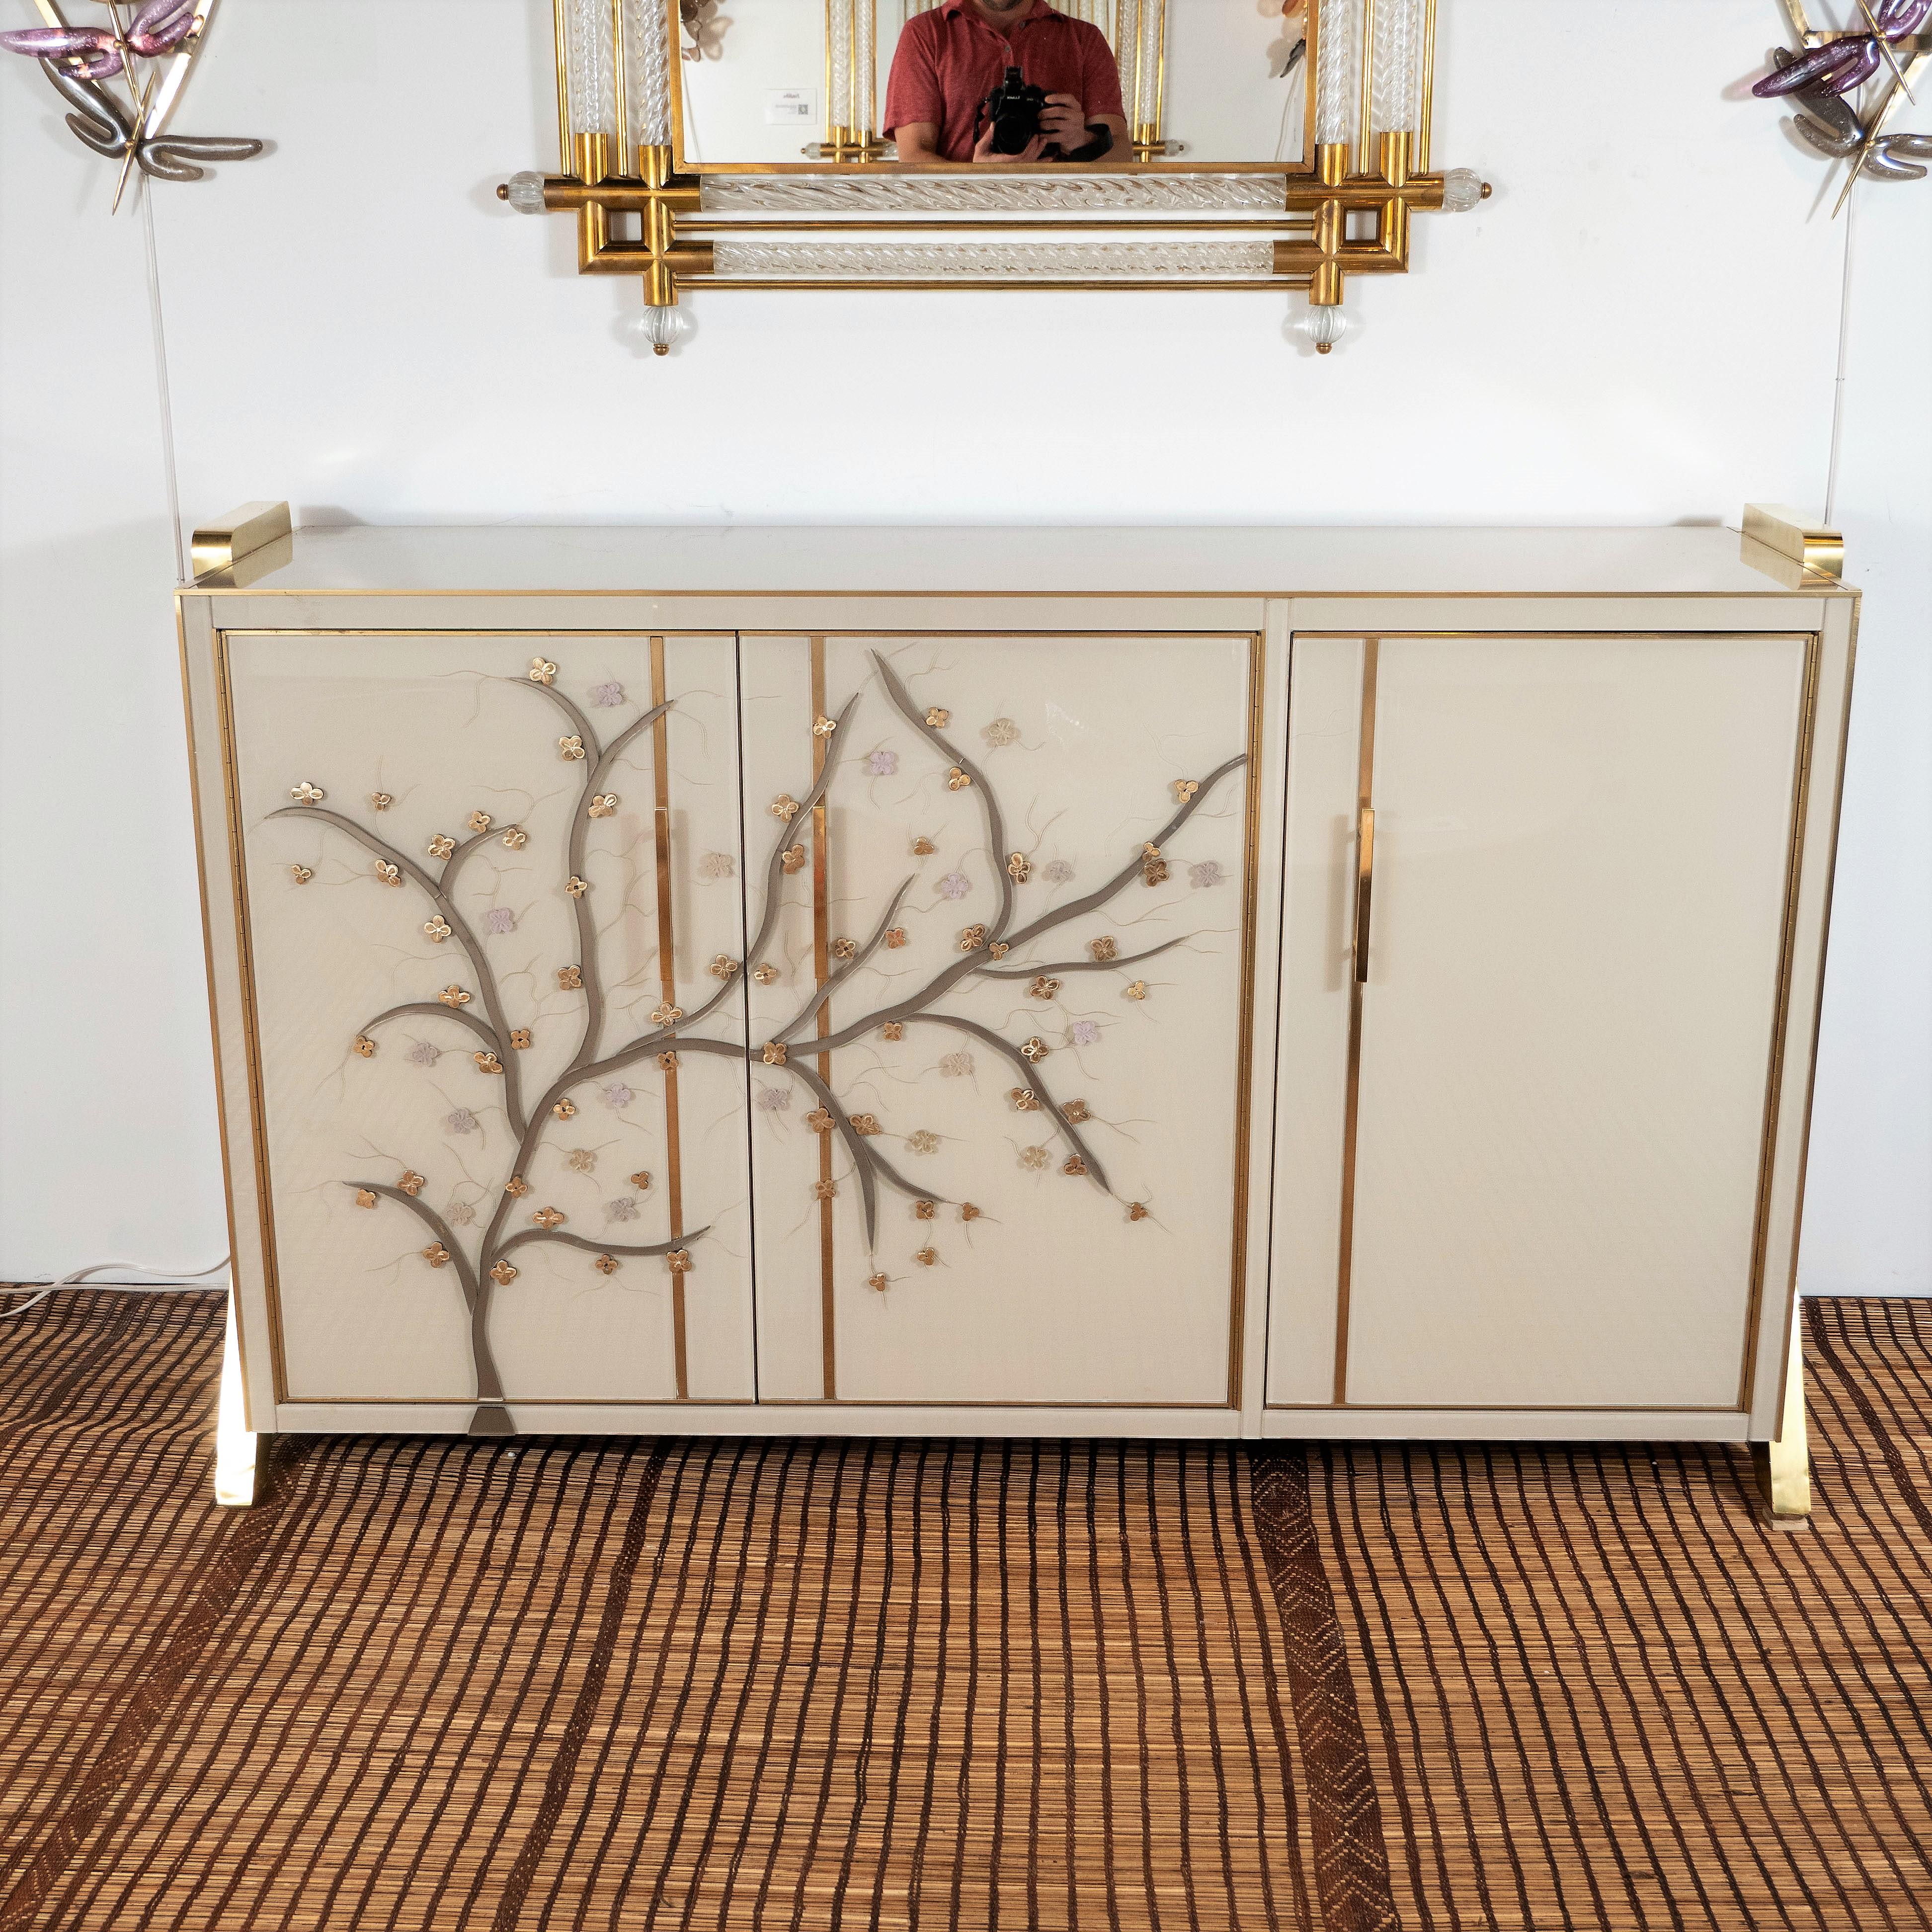 One of a kind pair of sideboards handmade in Venice, Italy by a master artisan and artist. Wooden frame is covered in ivory hand painted Murano glass panels with brass inlays. Handmade and handcut multicolored glass flowers in pearl, greyish purple